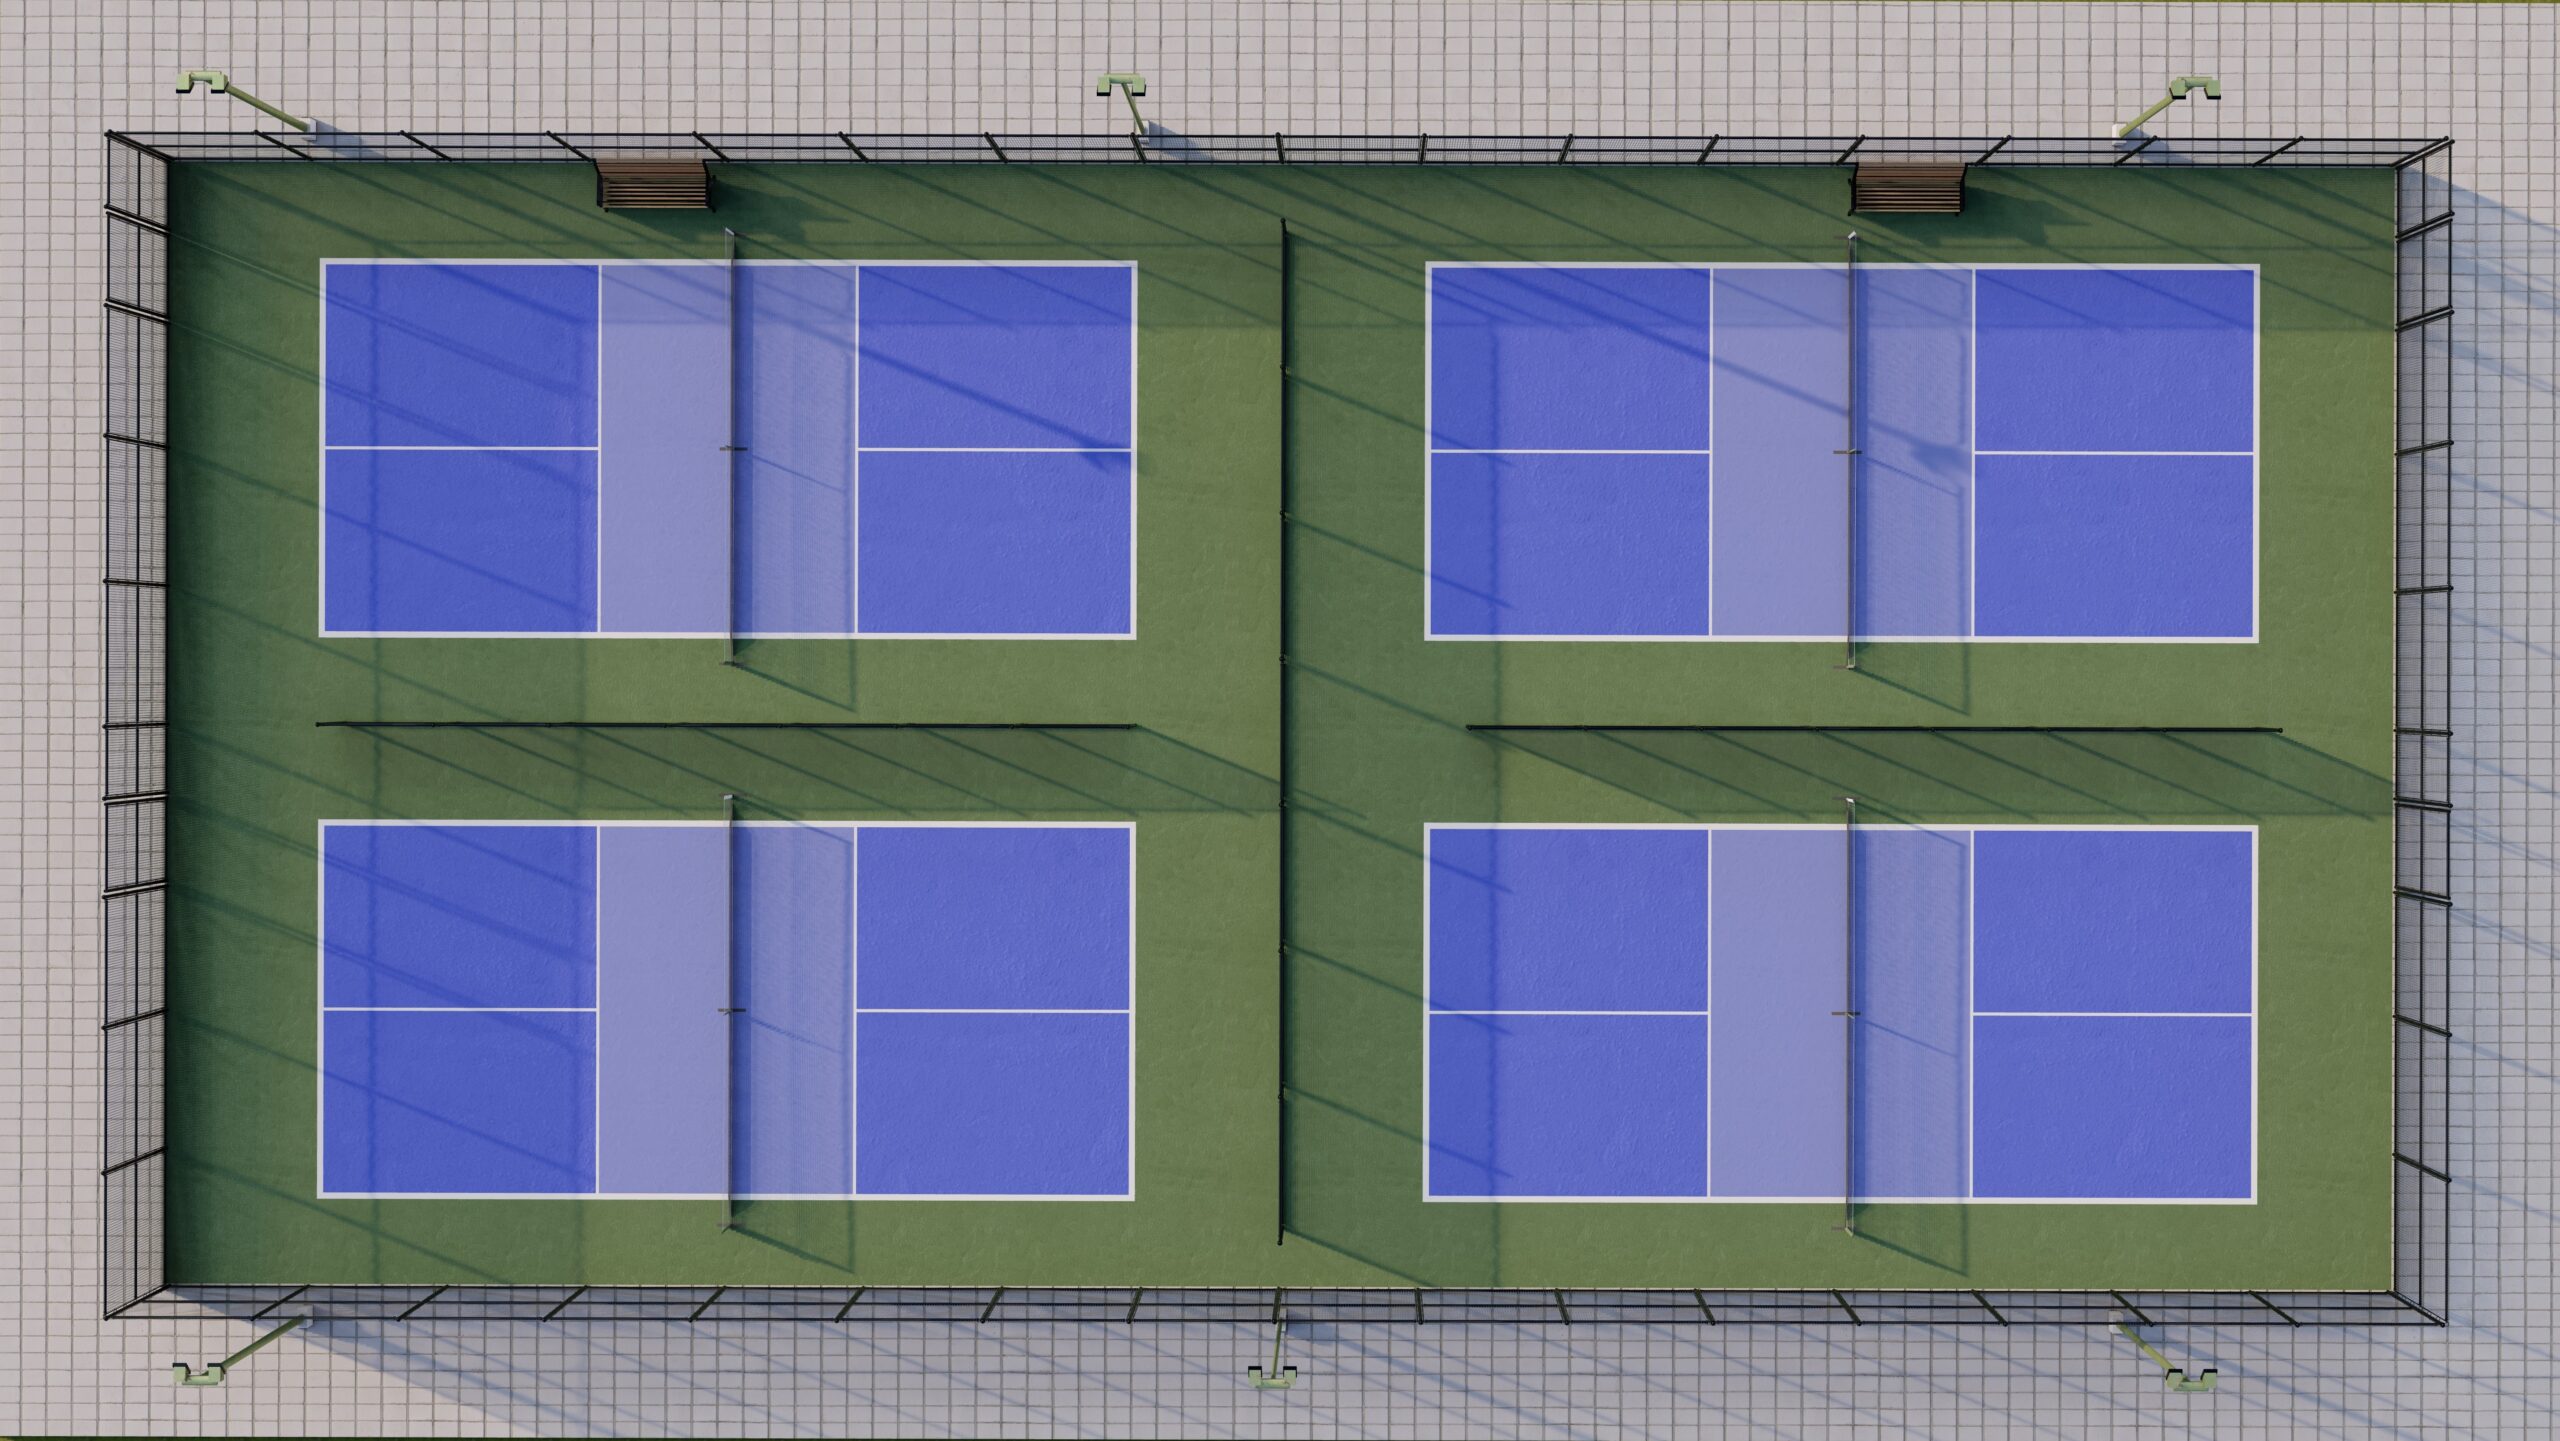 1 tennis courts converted to 4 pickleball courts